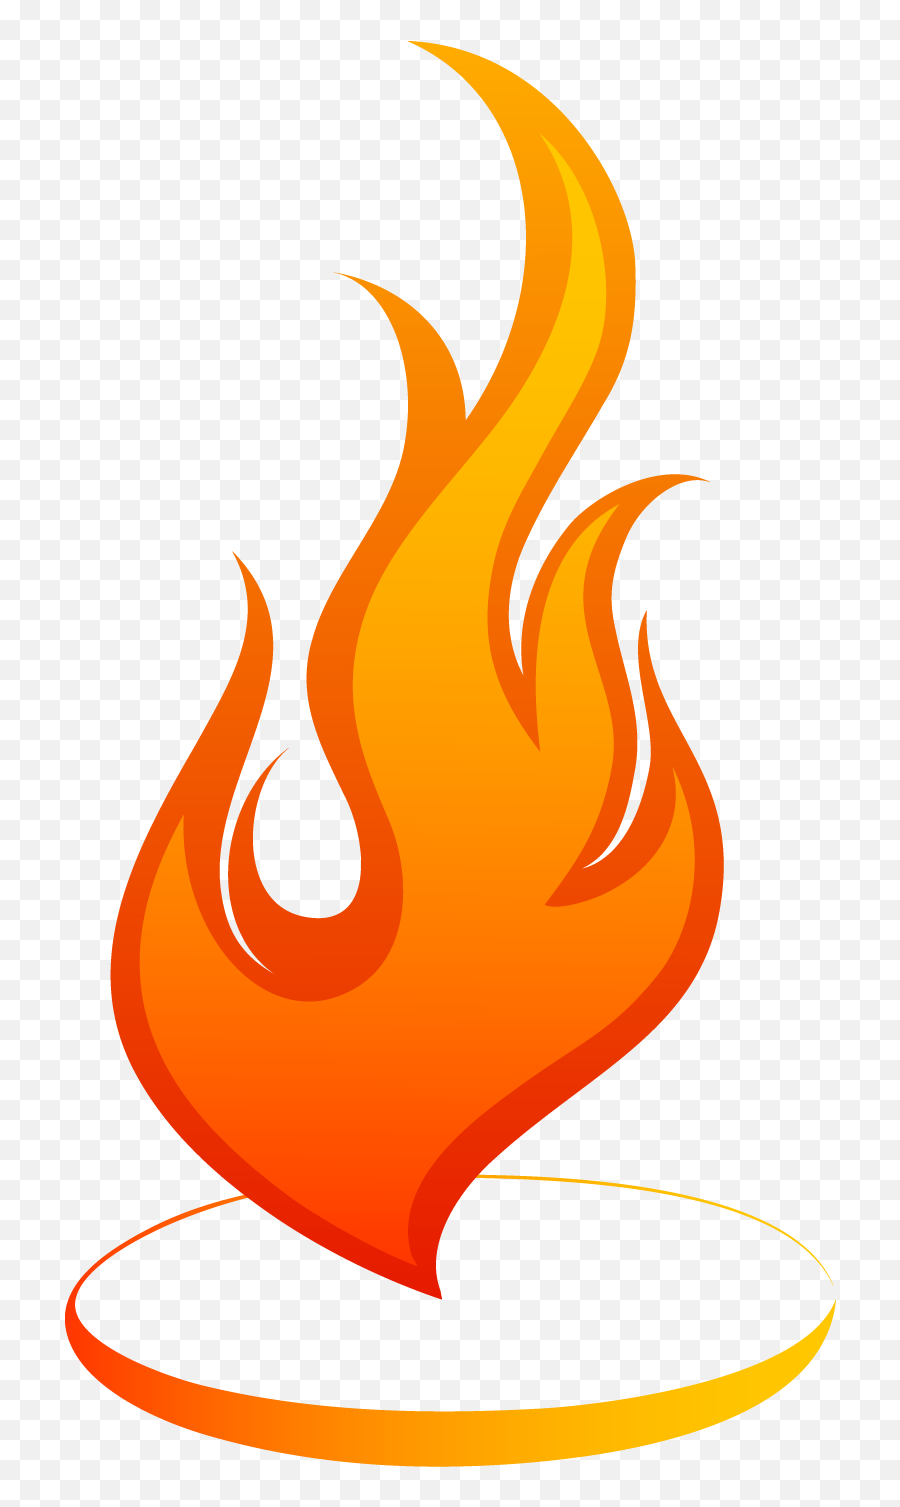 Download Explosion Fiery Fireball Flaming Flammable - Alev Desenleri Png,Fire Explosion Png